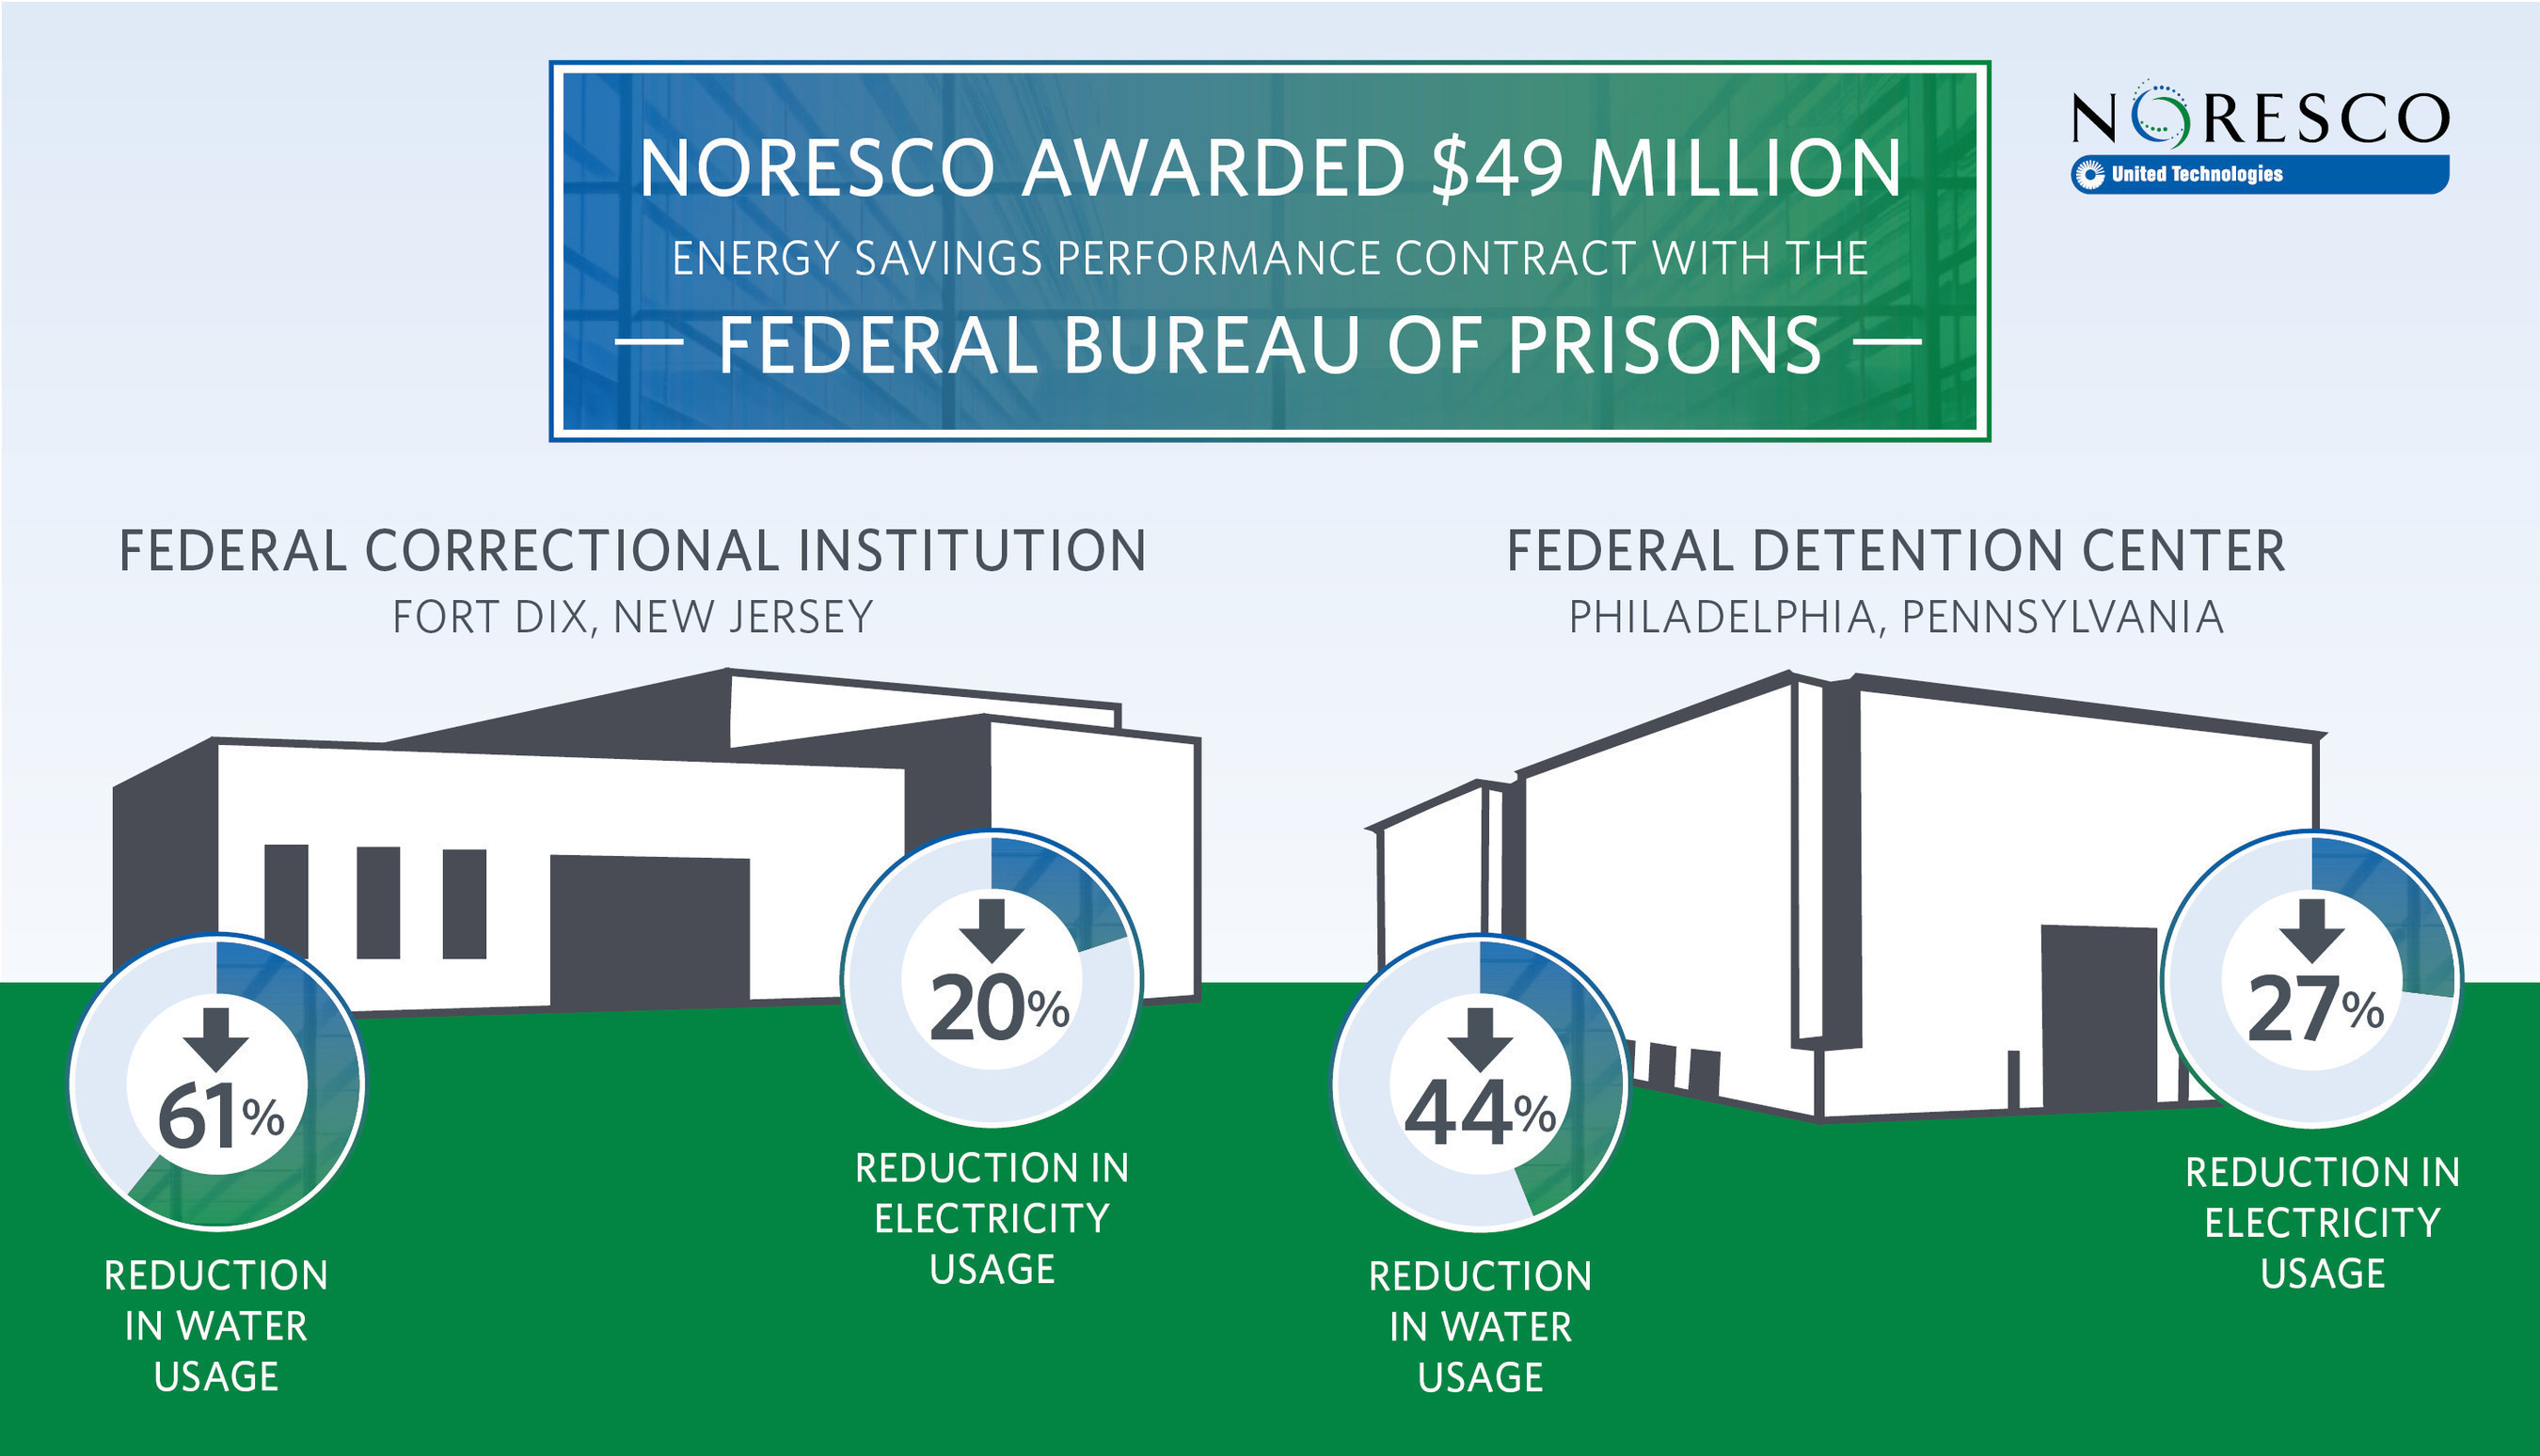 NORESCO, a national leader in energy efficiency and energy infrastructure solutions, will provide energy and water efficiency and capital infrastructure upgrades at two Federal Bureau of Prisons sites: Federal Correctional Institution (FCI) Fort Dix, New Jersey, and Federal Detention Center (FDC) Philadelphia.